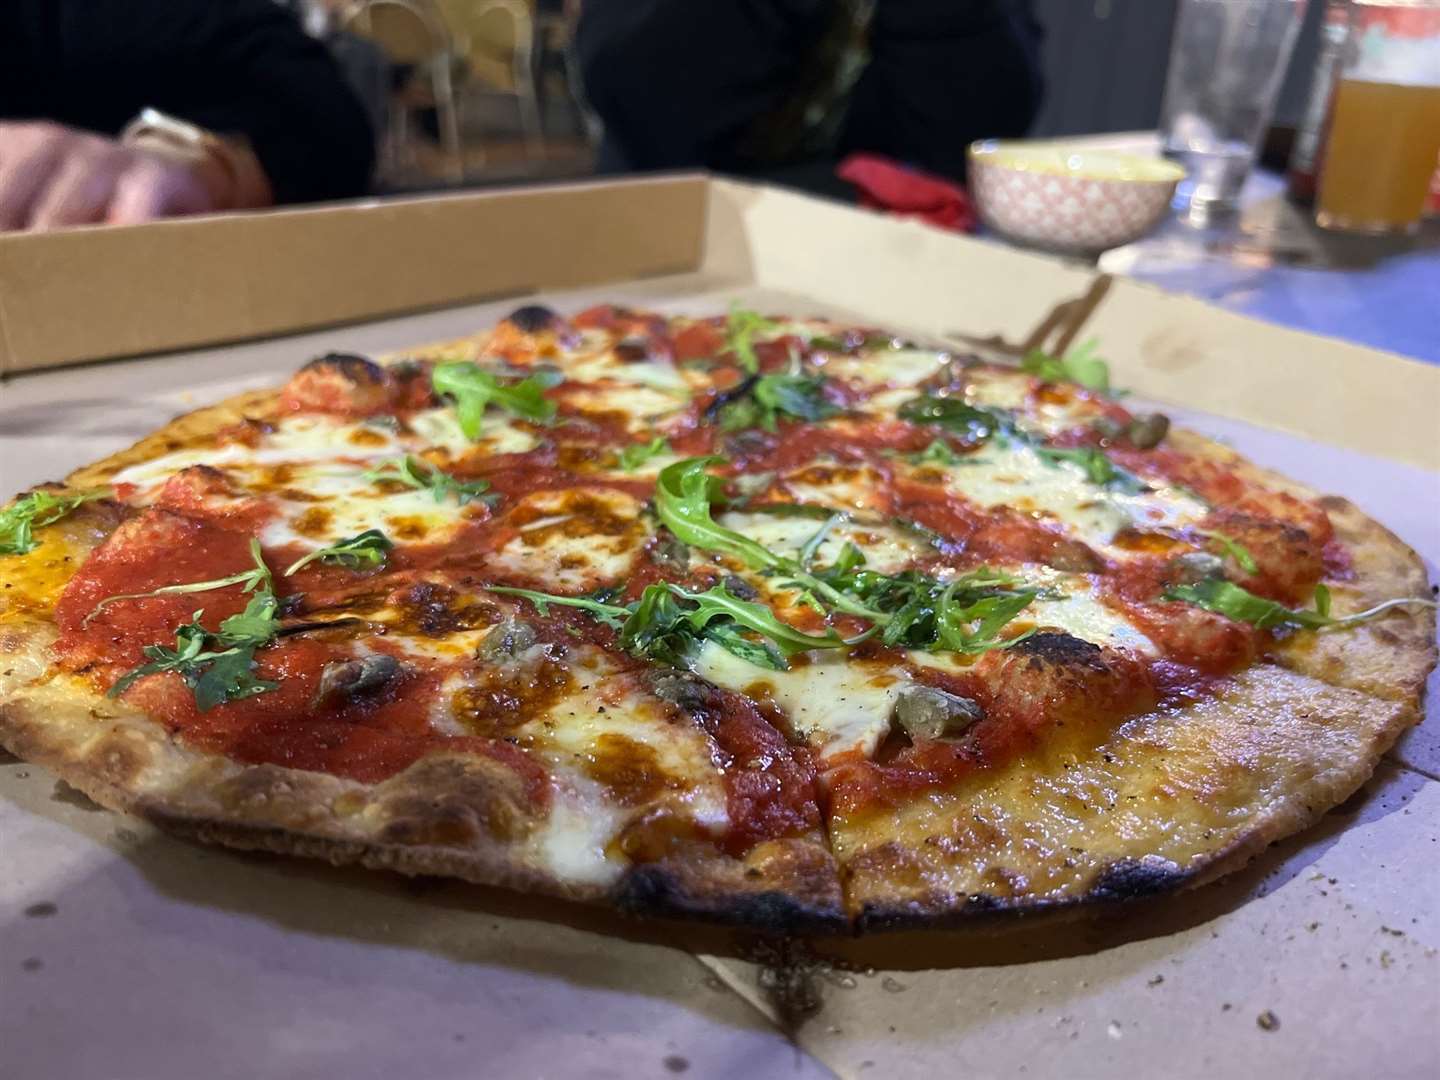 Margate Leisure Centre serves up a variety of tasty, classic, pizzas